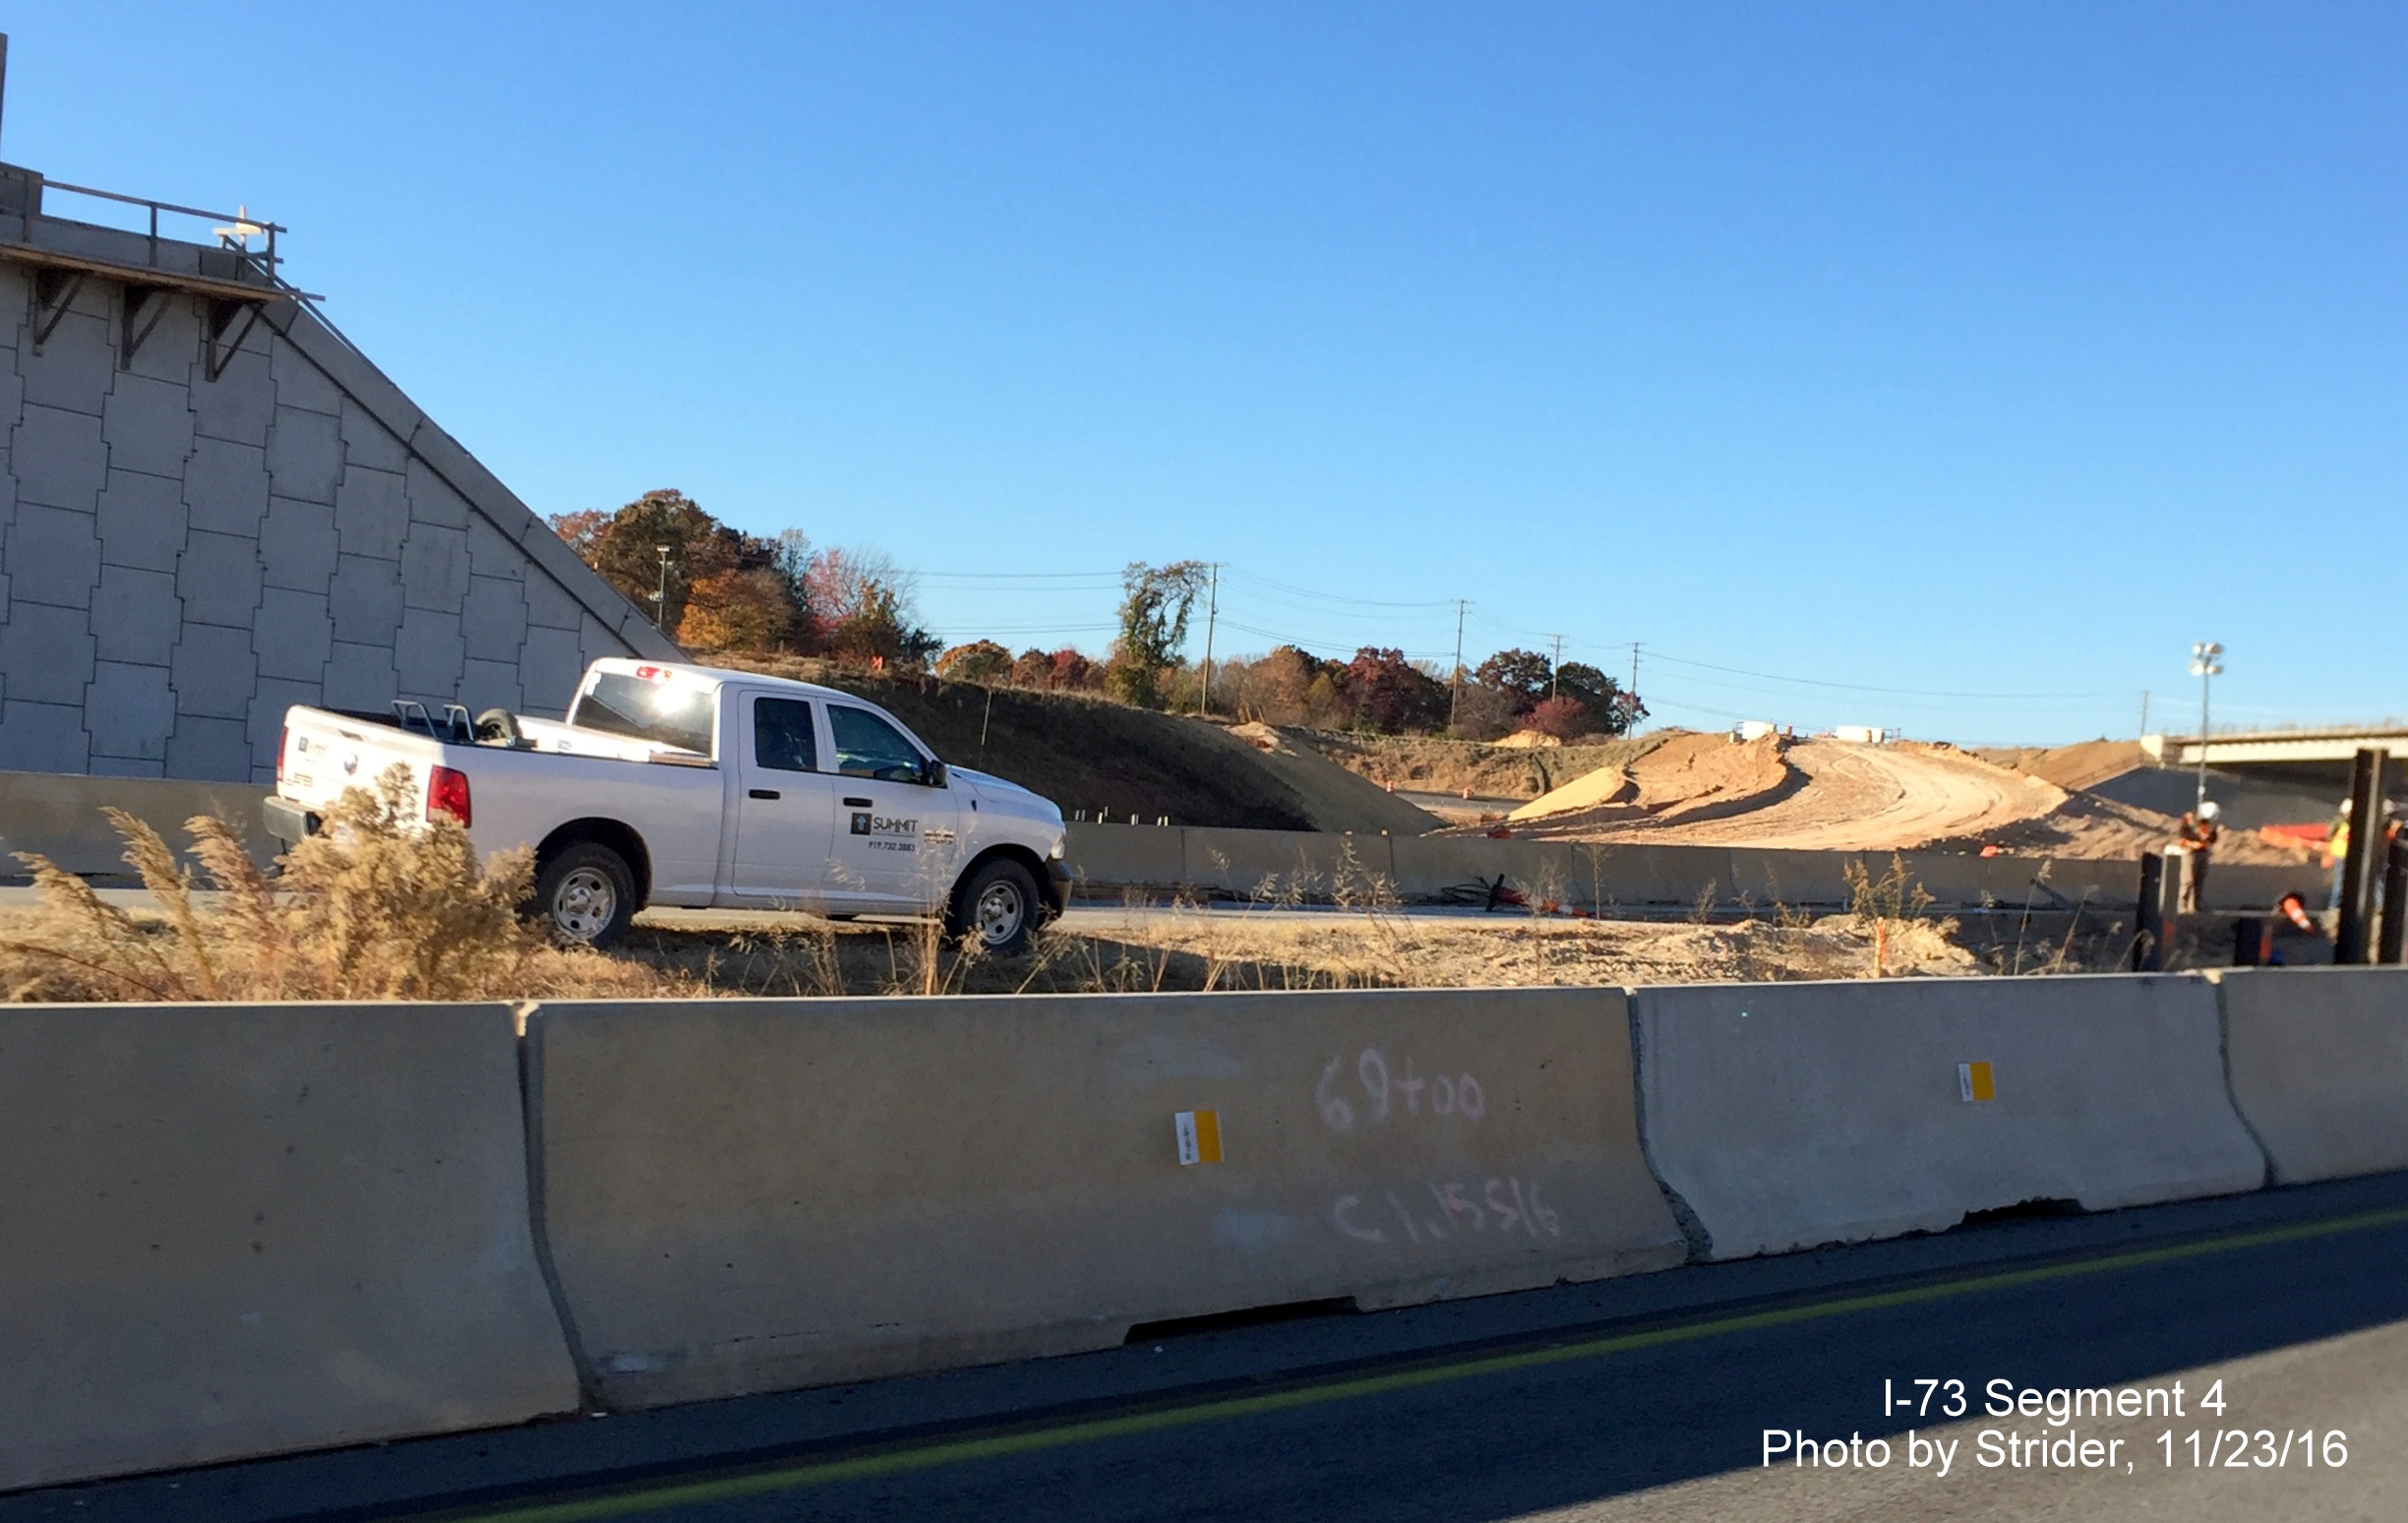 Image taken from NC 68 North showing progress in building I-73 South onramp to NC 68 South, by Strider